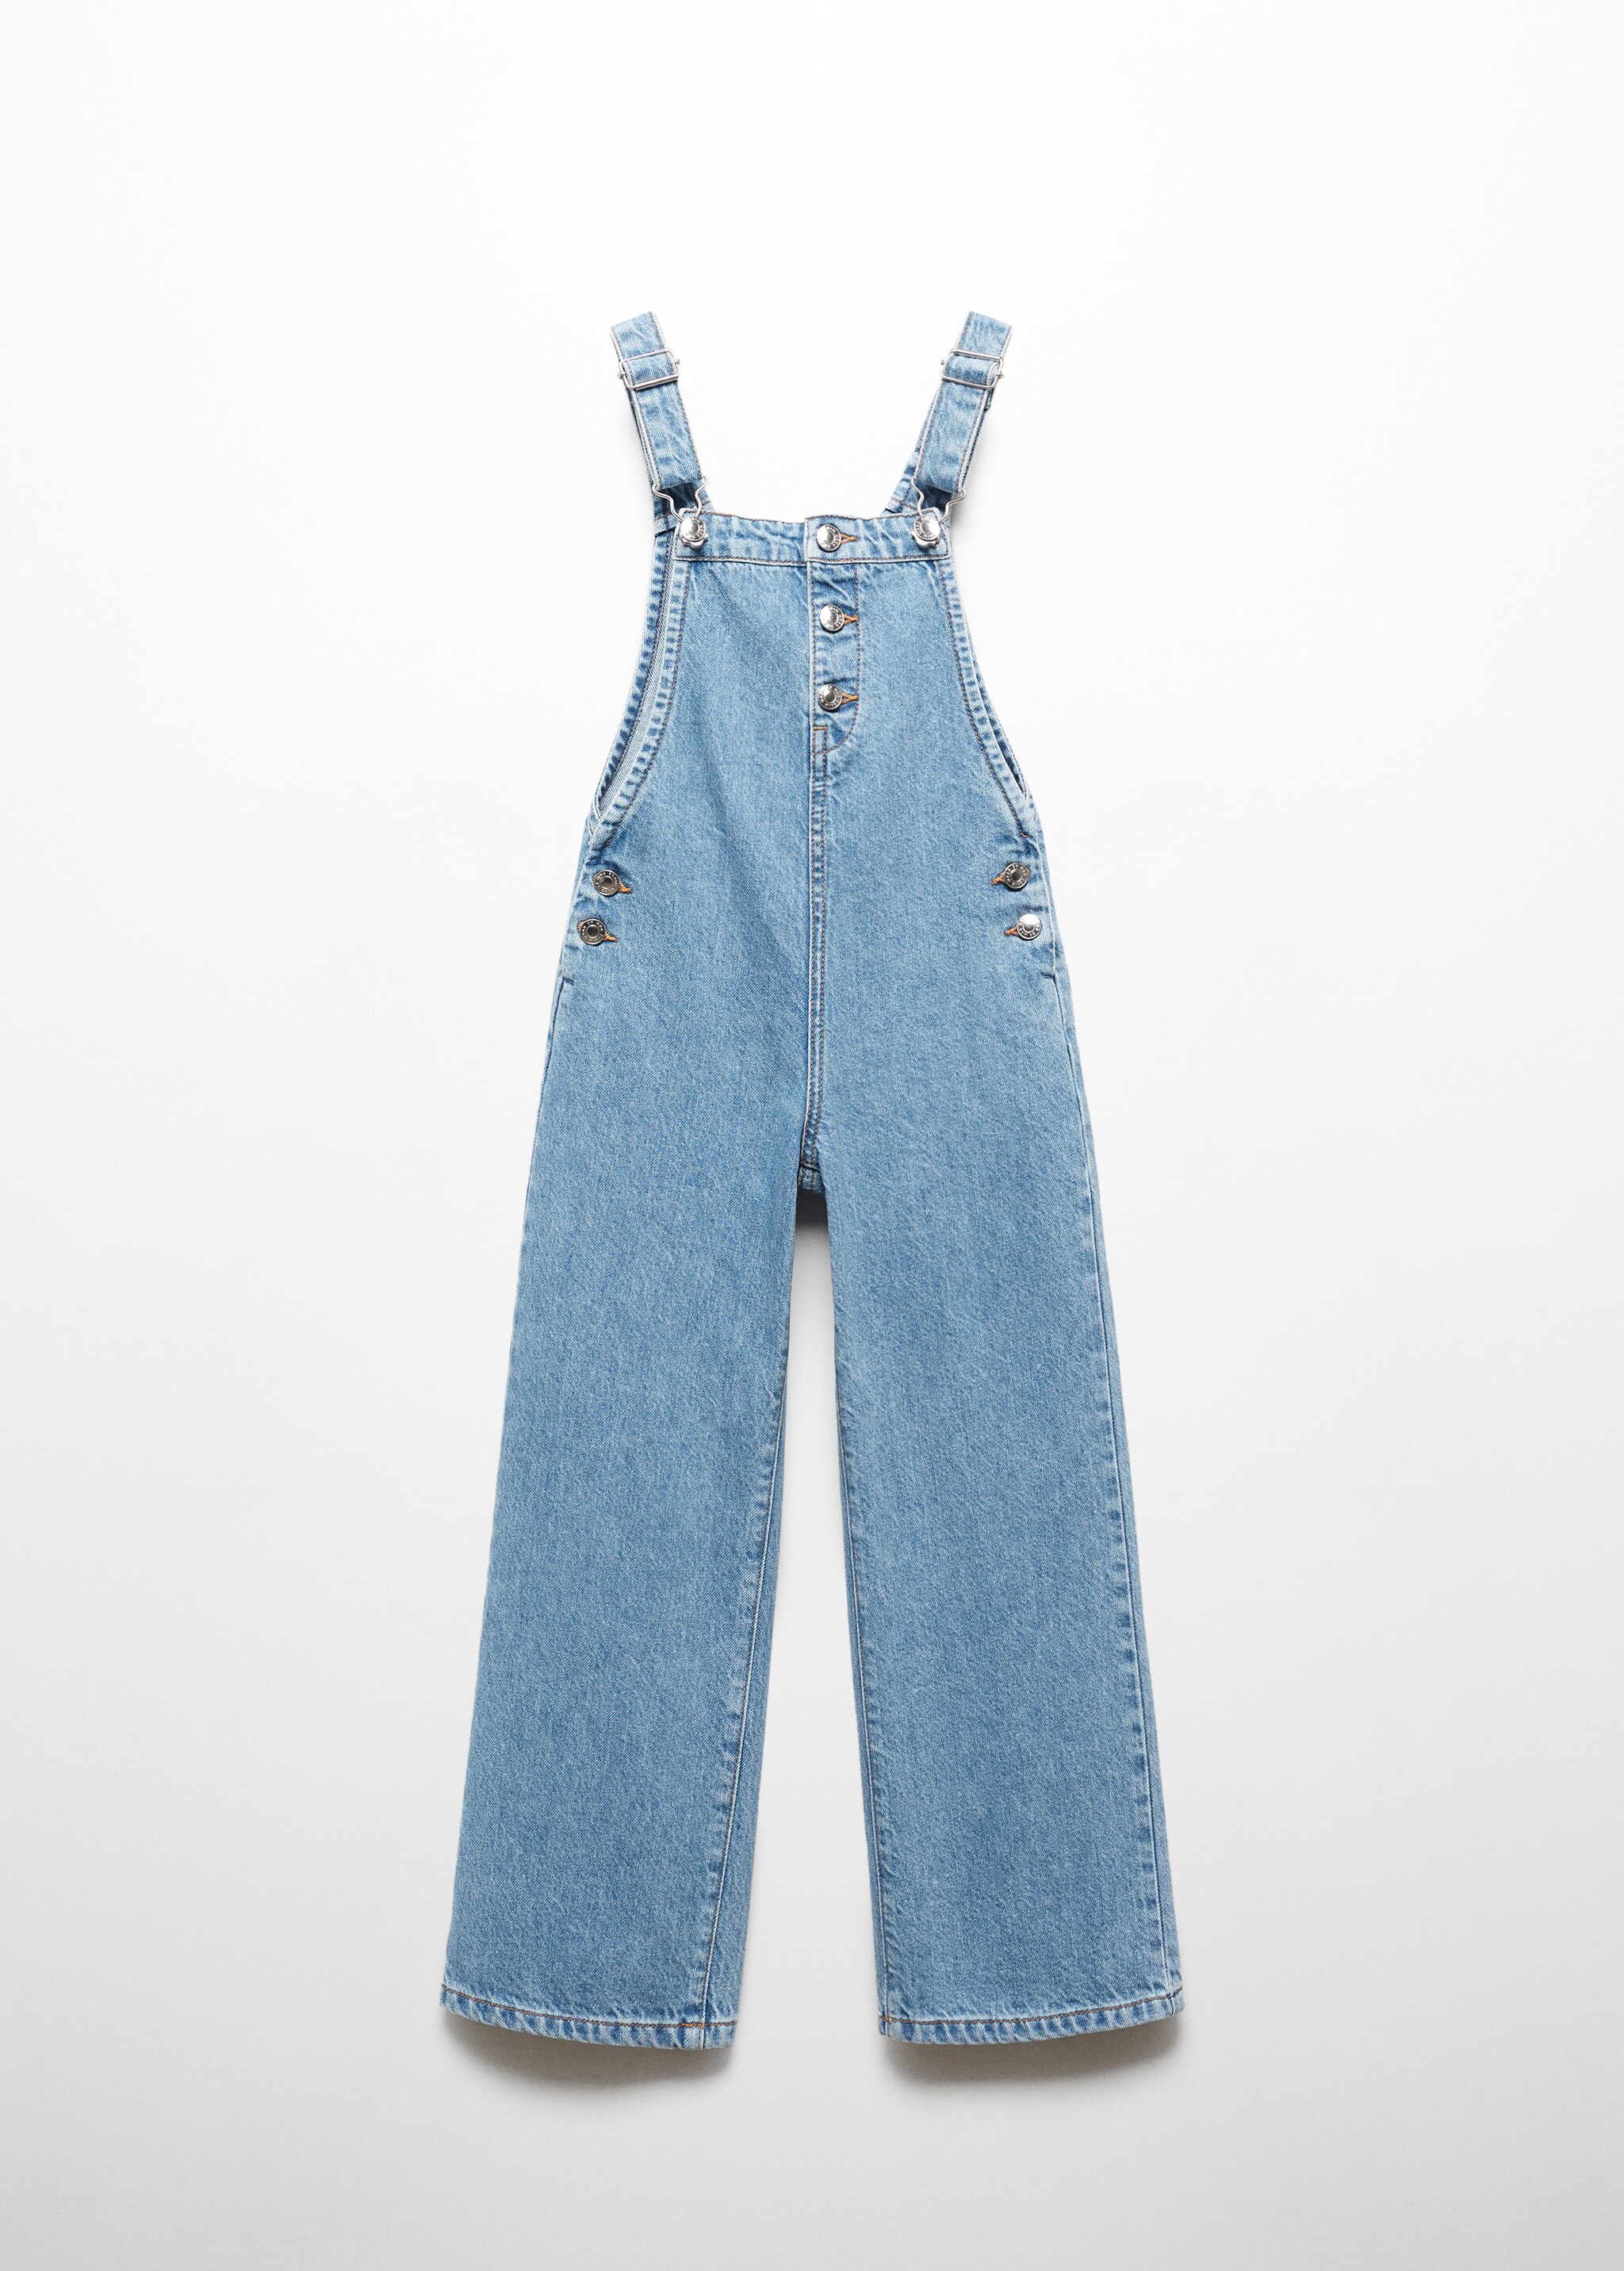 Denim buttoned dungarees - Article without model